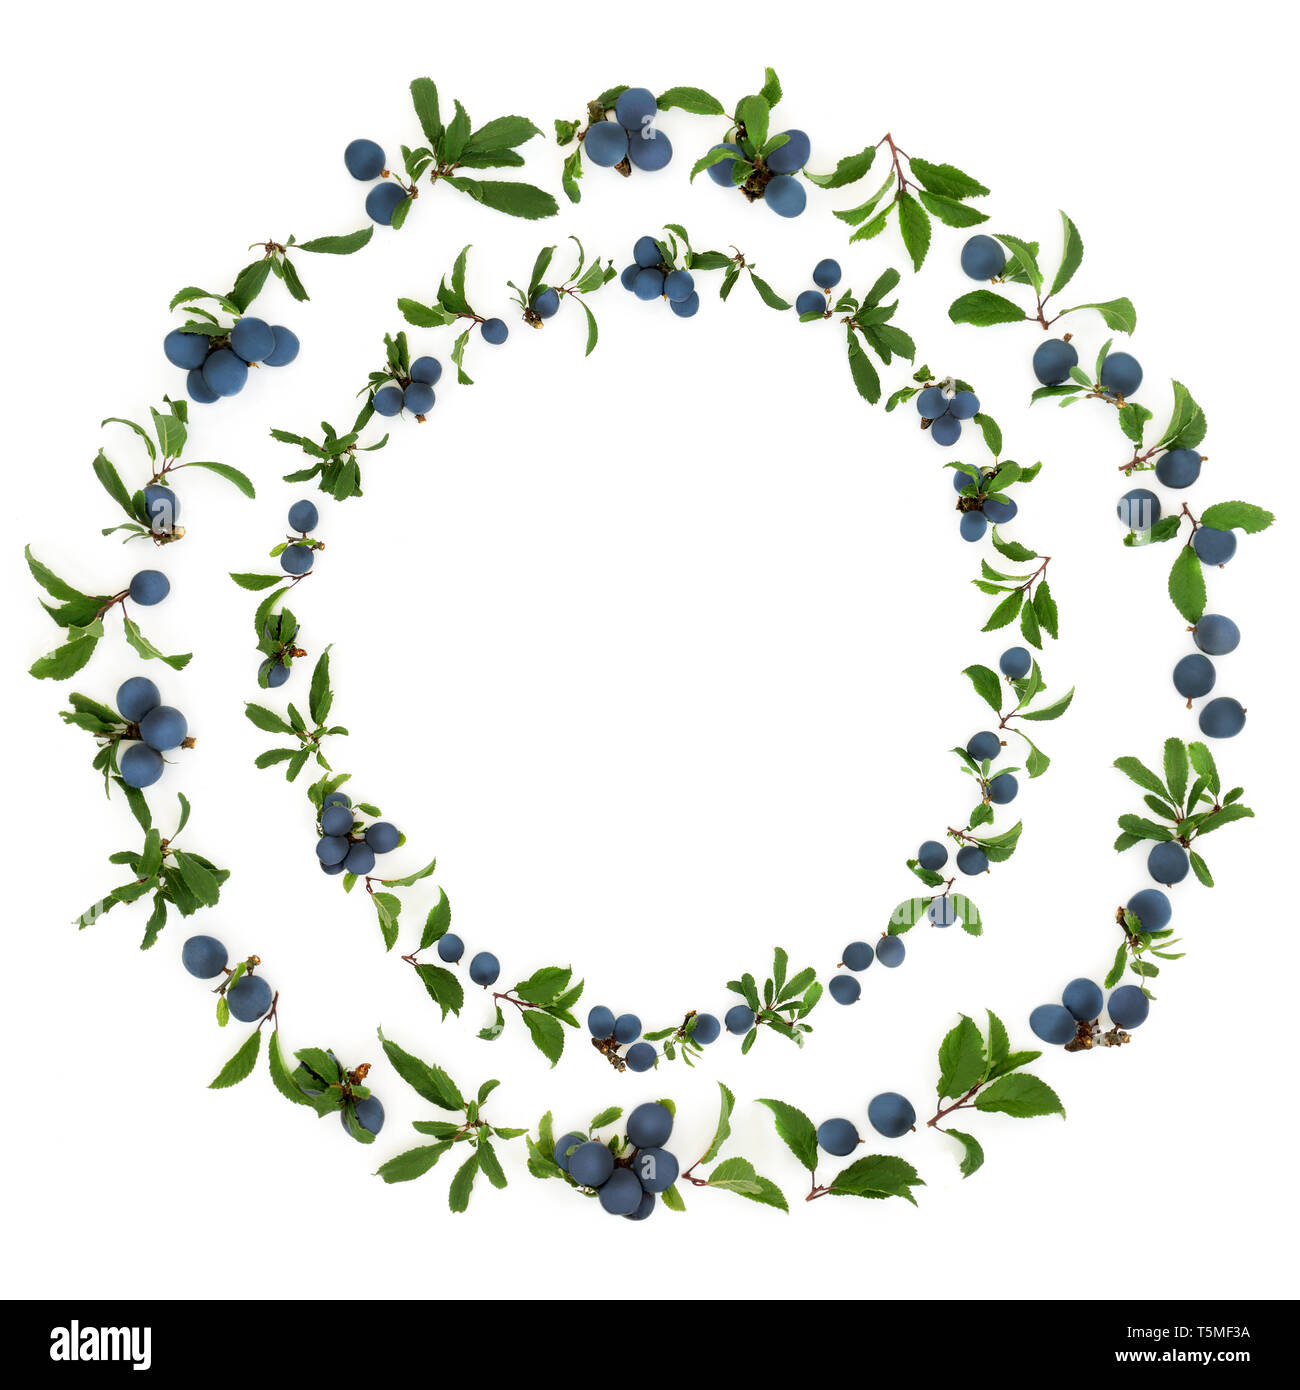 Abstract sloe berry wreath on white background also known as blackthorn. Pruna spinosa. Stock Photo